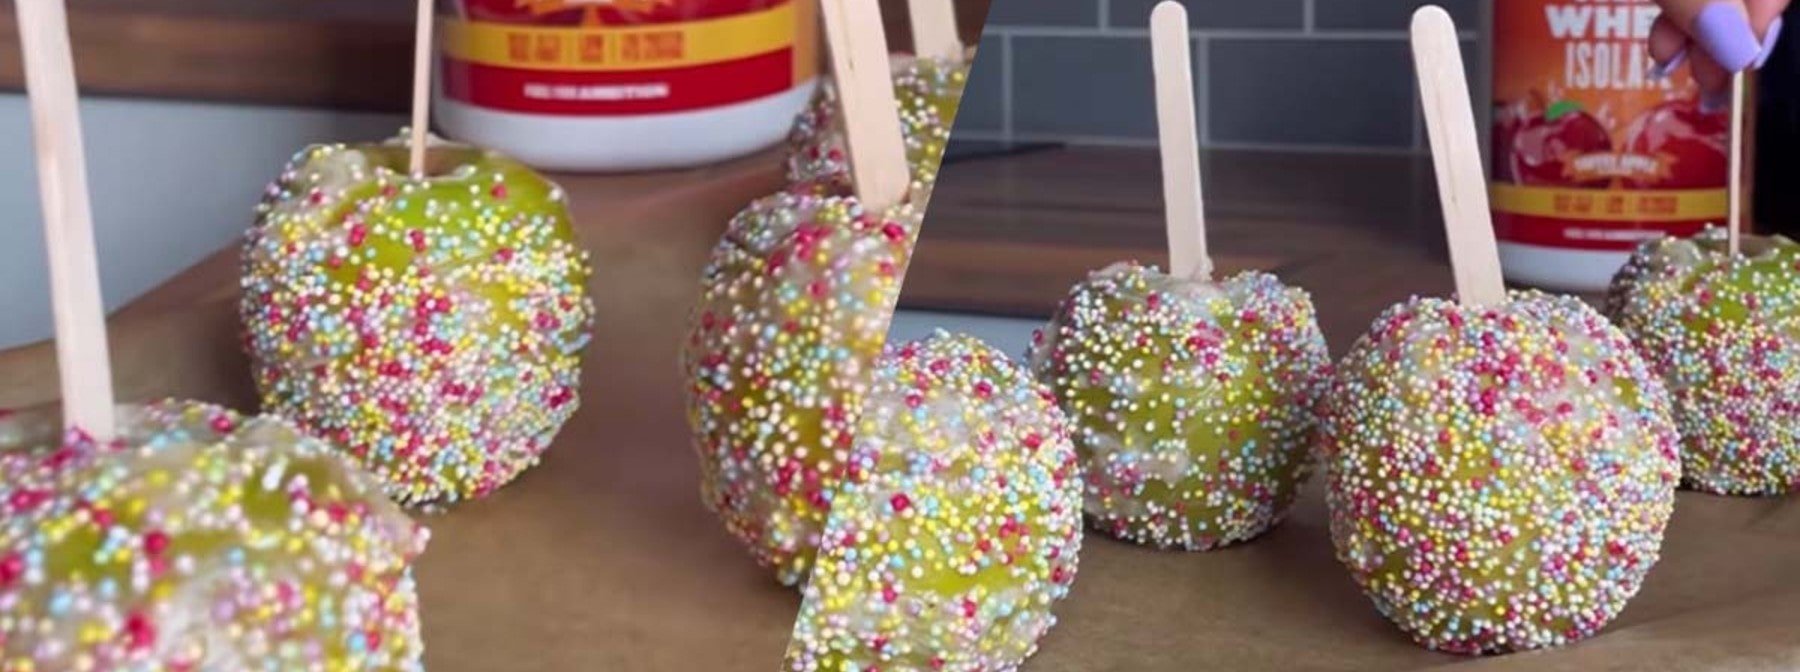 Protein Toffee Apples